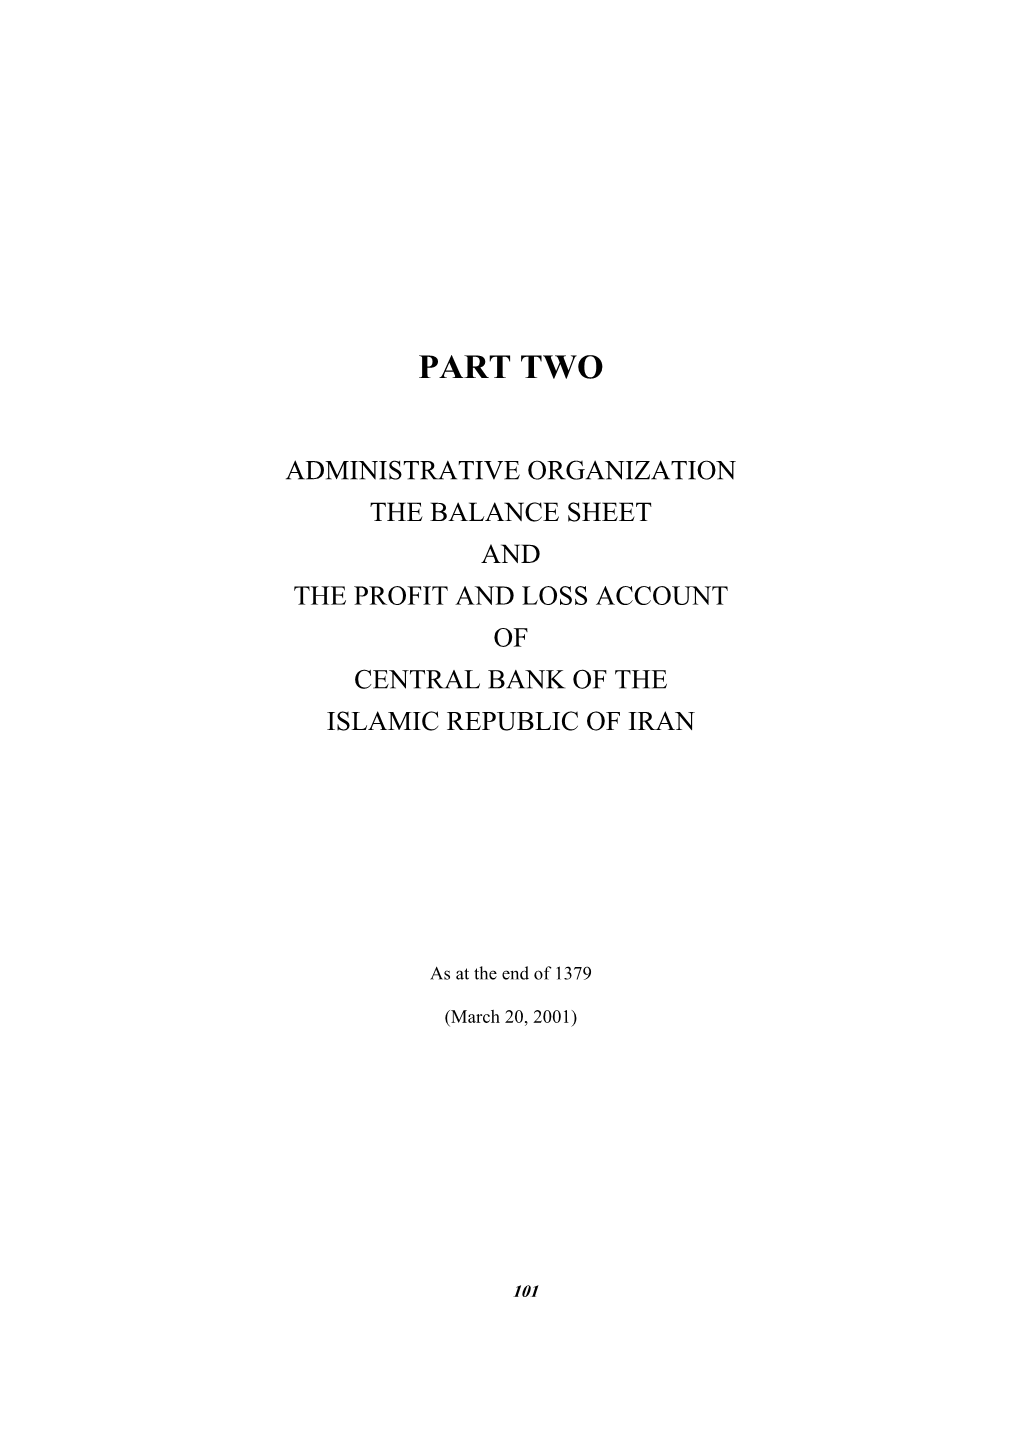 Part Two: Administrative Organization, the Balance Sheet and the Profit And